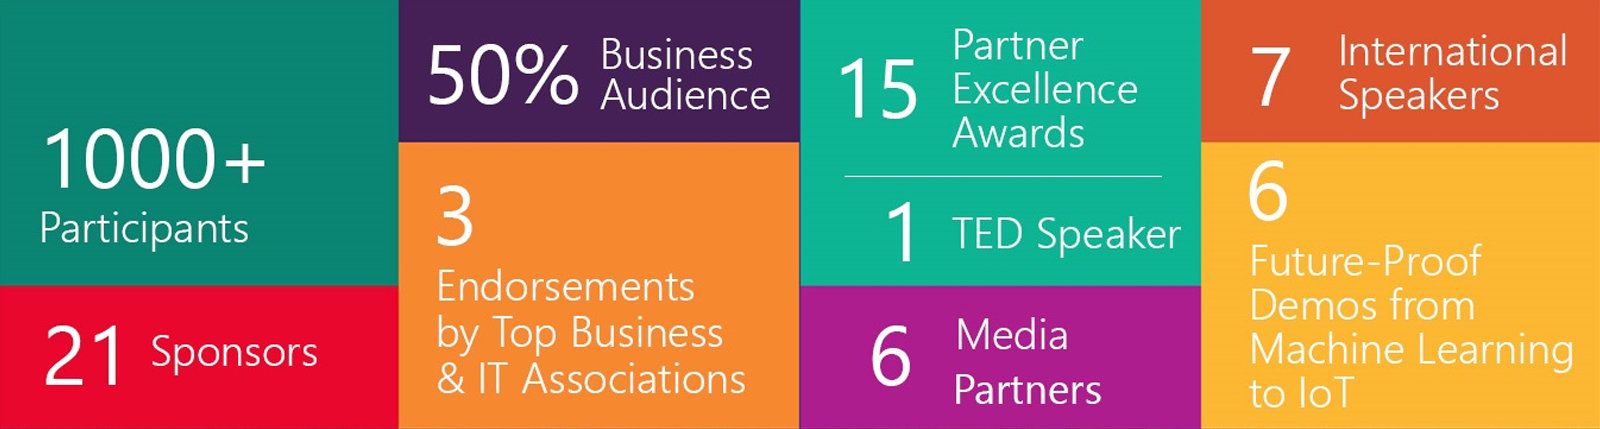 1000+ Participants, 21 Sponsors, 50% Audience, 3 Endorsements by Top Business & IT Associations, 15 Excellence  Awards, 1 TED Speaker, 6 Media Partners, 7 International Speakers,  6 Future-Proof Demos from Machine Learning to loT - Facts and Stats from the 2nd Microsoft Summit